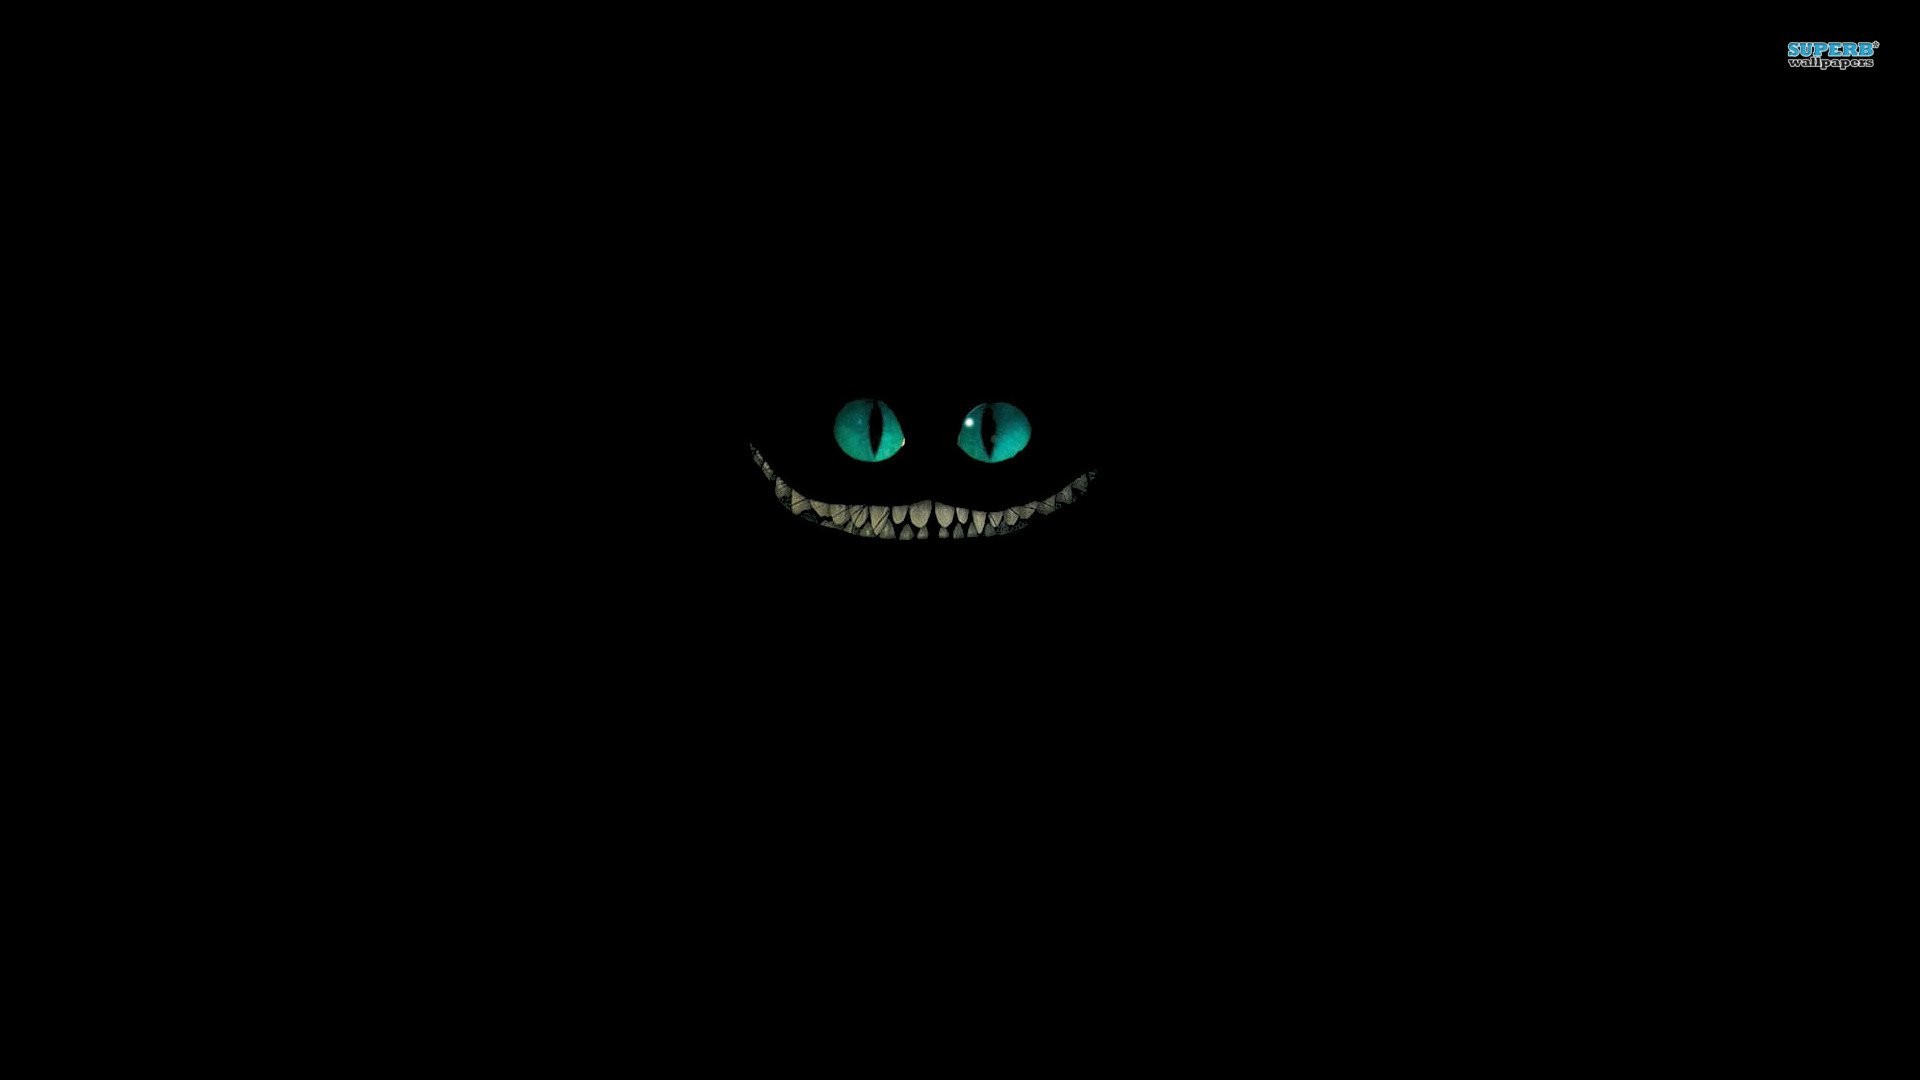 Cheshire Cat wallpaper ·① Download free cool full HD wallpapers for